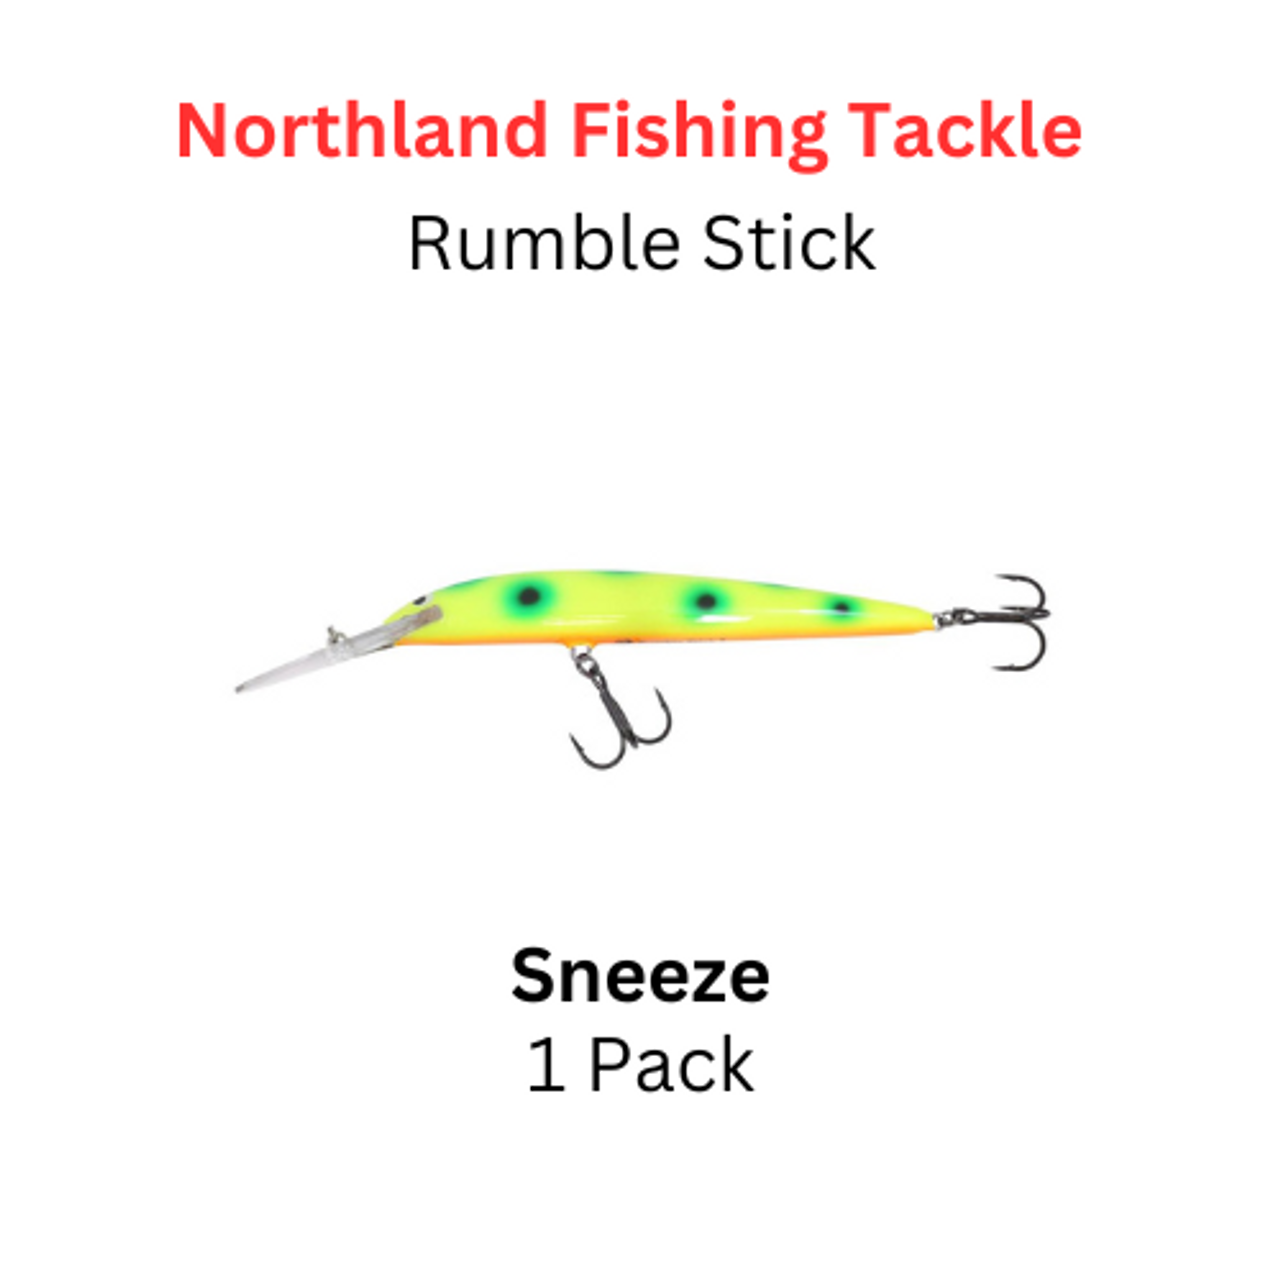 https://cdn11.bigcommerce.com/s-u9nbd/images/stencil/1280x1280/products/6313/15915/Northland_Fishing_Tackle_Rumble_Stick_Sneeze__79016.1677008227.png?c=2